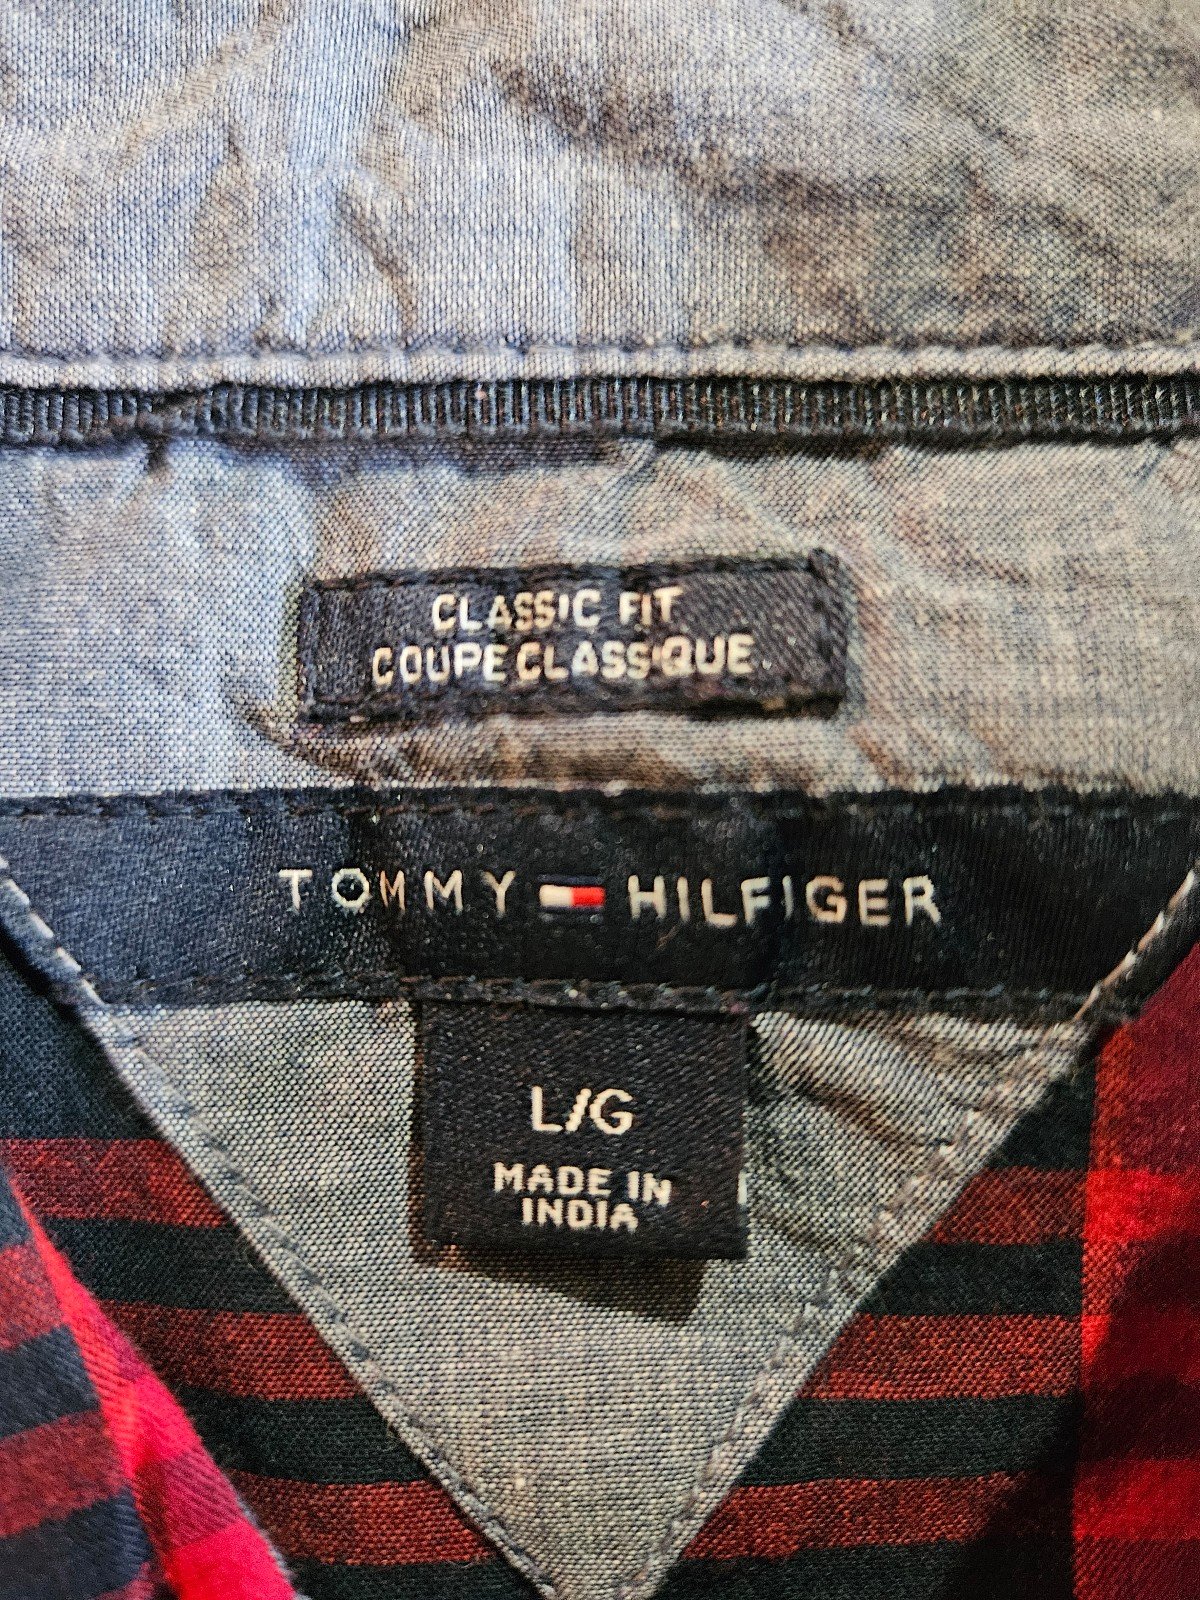 Cheap Tommy Hilfiger Women´s Classic Fit Navy Blue And Red Plaid Blouse Size Large J5FRYHUwy outlet online shop